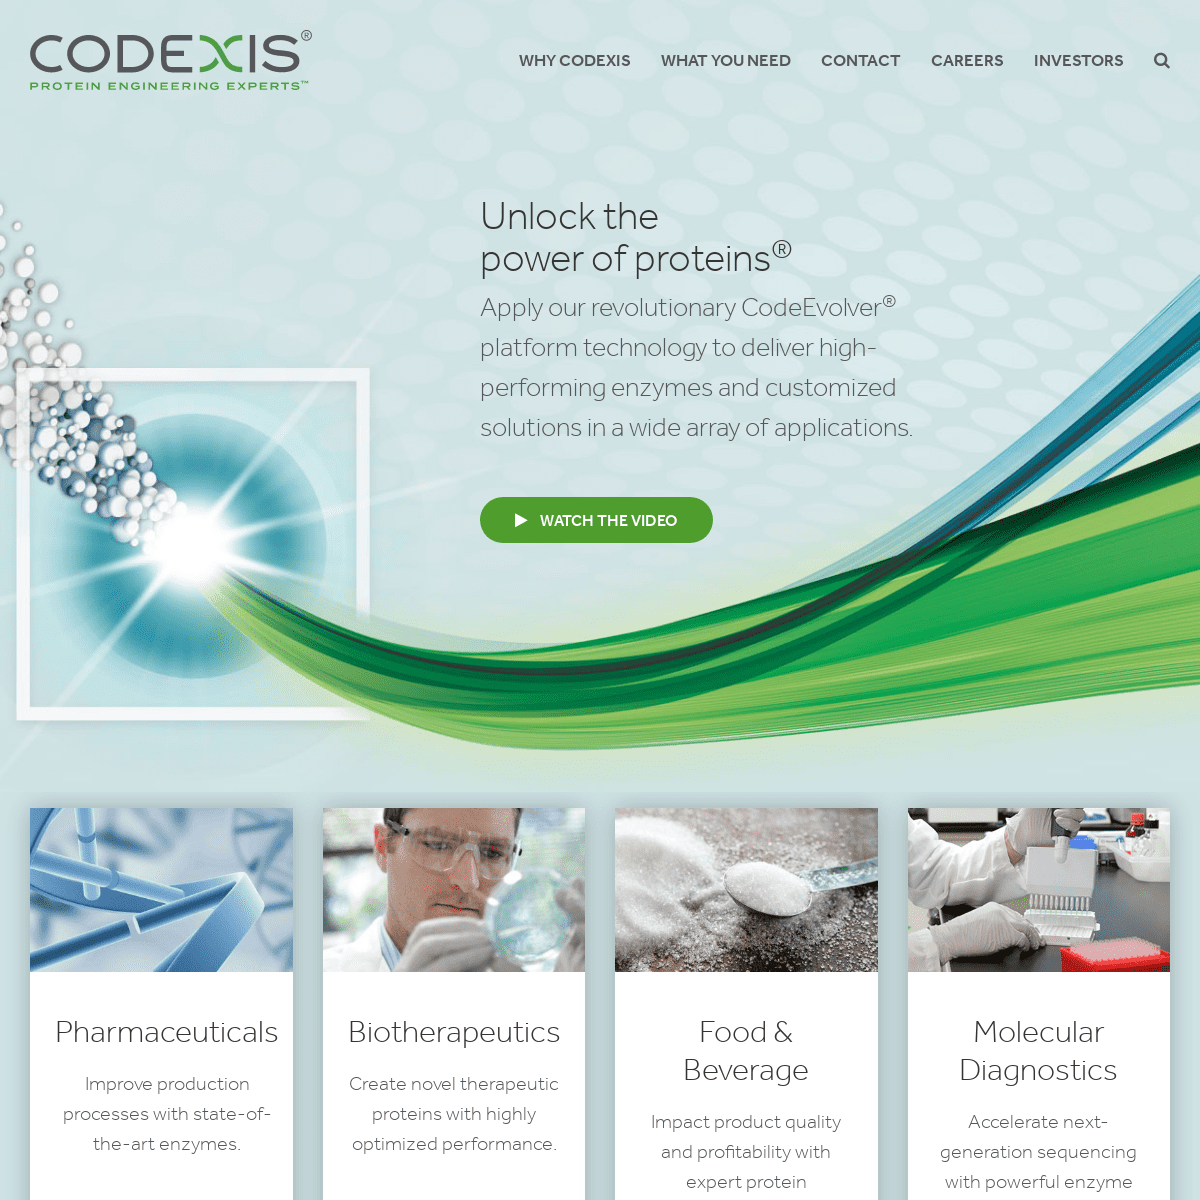 Protein Engineering Experts | Codexis